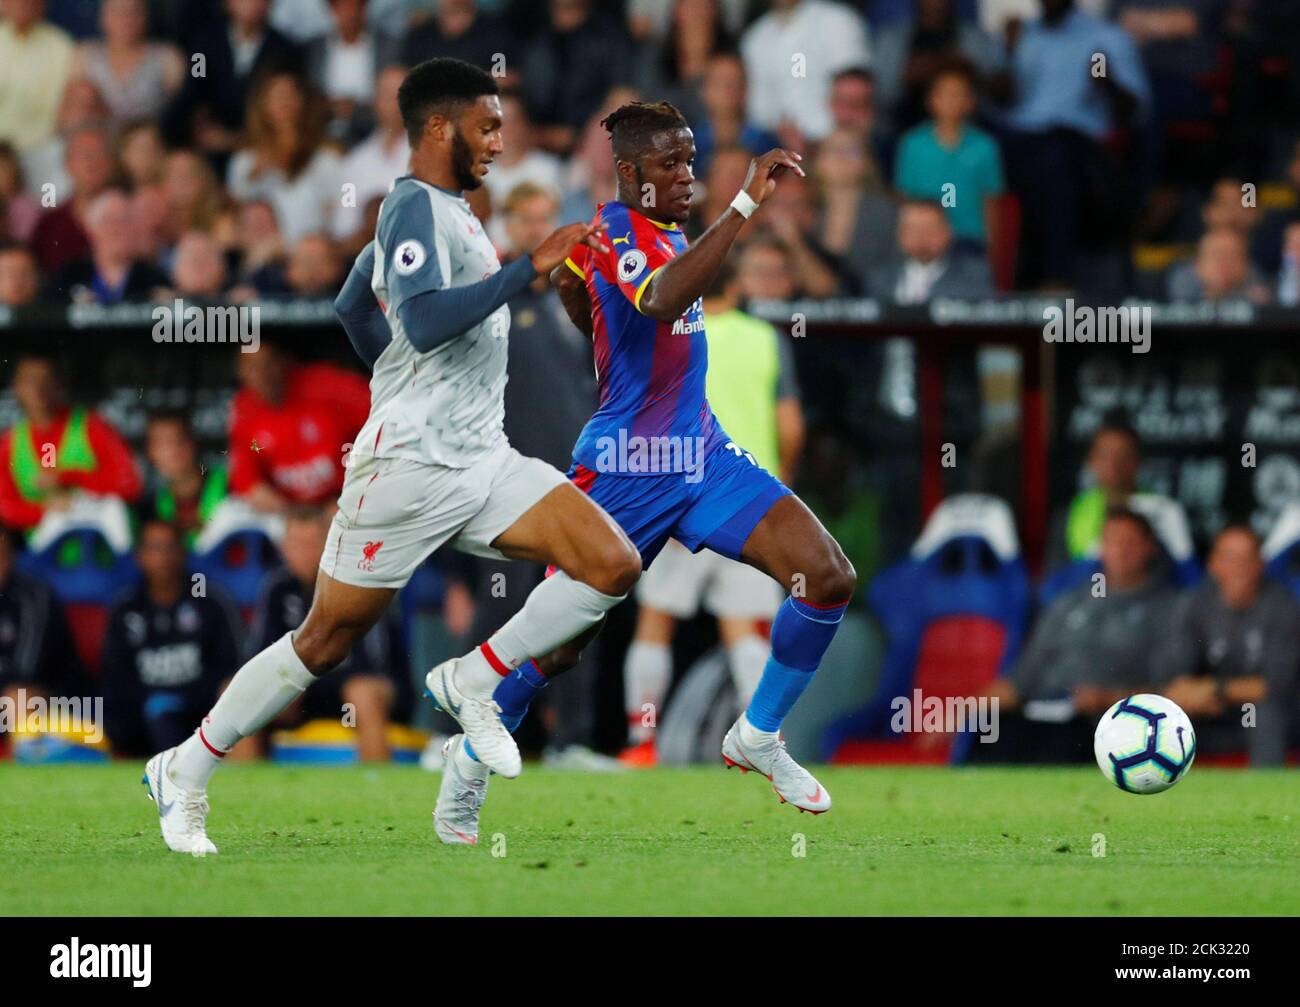 Soccer Football - Premier League - Crystal Palace v Liverpool - Selhurst Park, London, Britain - August 20, 2018  Crystal Palace's Wilfried Zaha in action with Liverpool's Joe Gomez               REUTERS/Eddie Keogh  EDITORIAL USE ONLY. No use with unauthorized audio, video, data, fixture lists, club/league logos or "live" services. Online in-match use limited to 75 images, no video emulation. No use in betting, games or single club/league/player publications.  Please contact your account representative for further details. Stock Photo